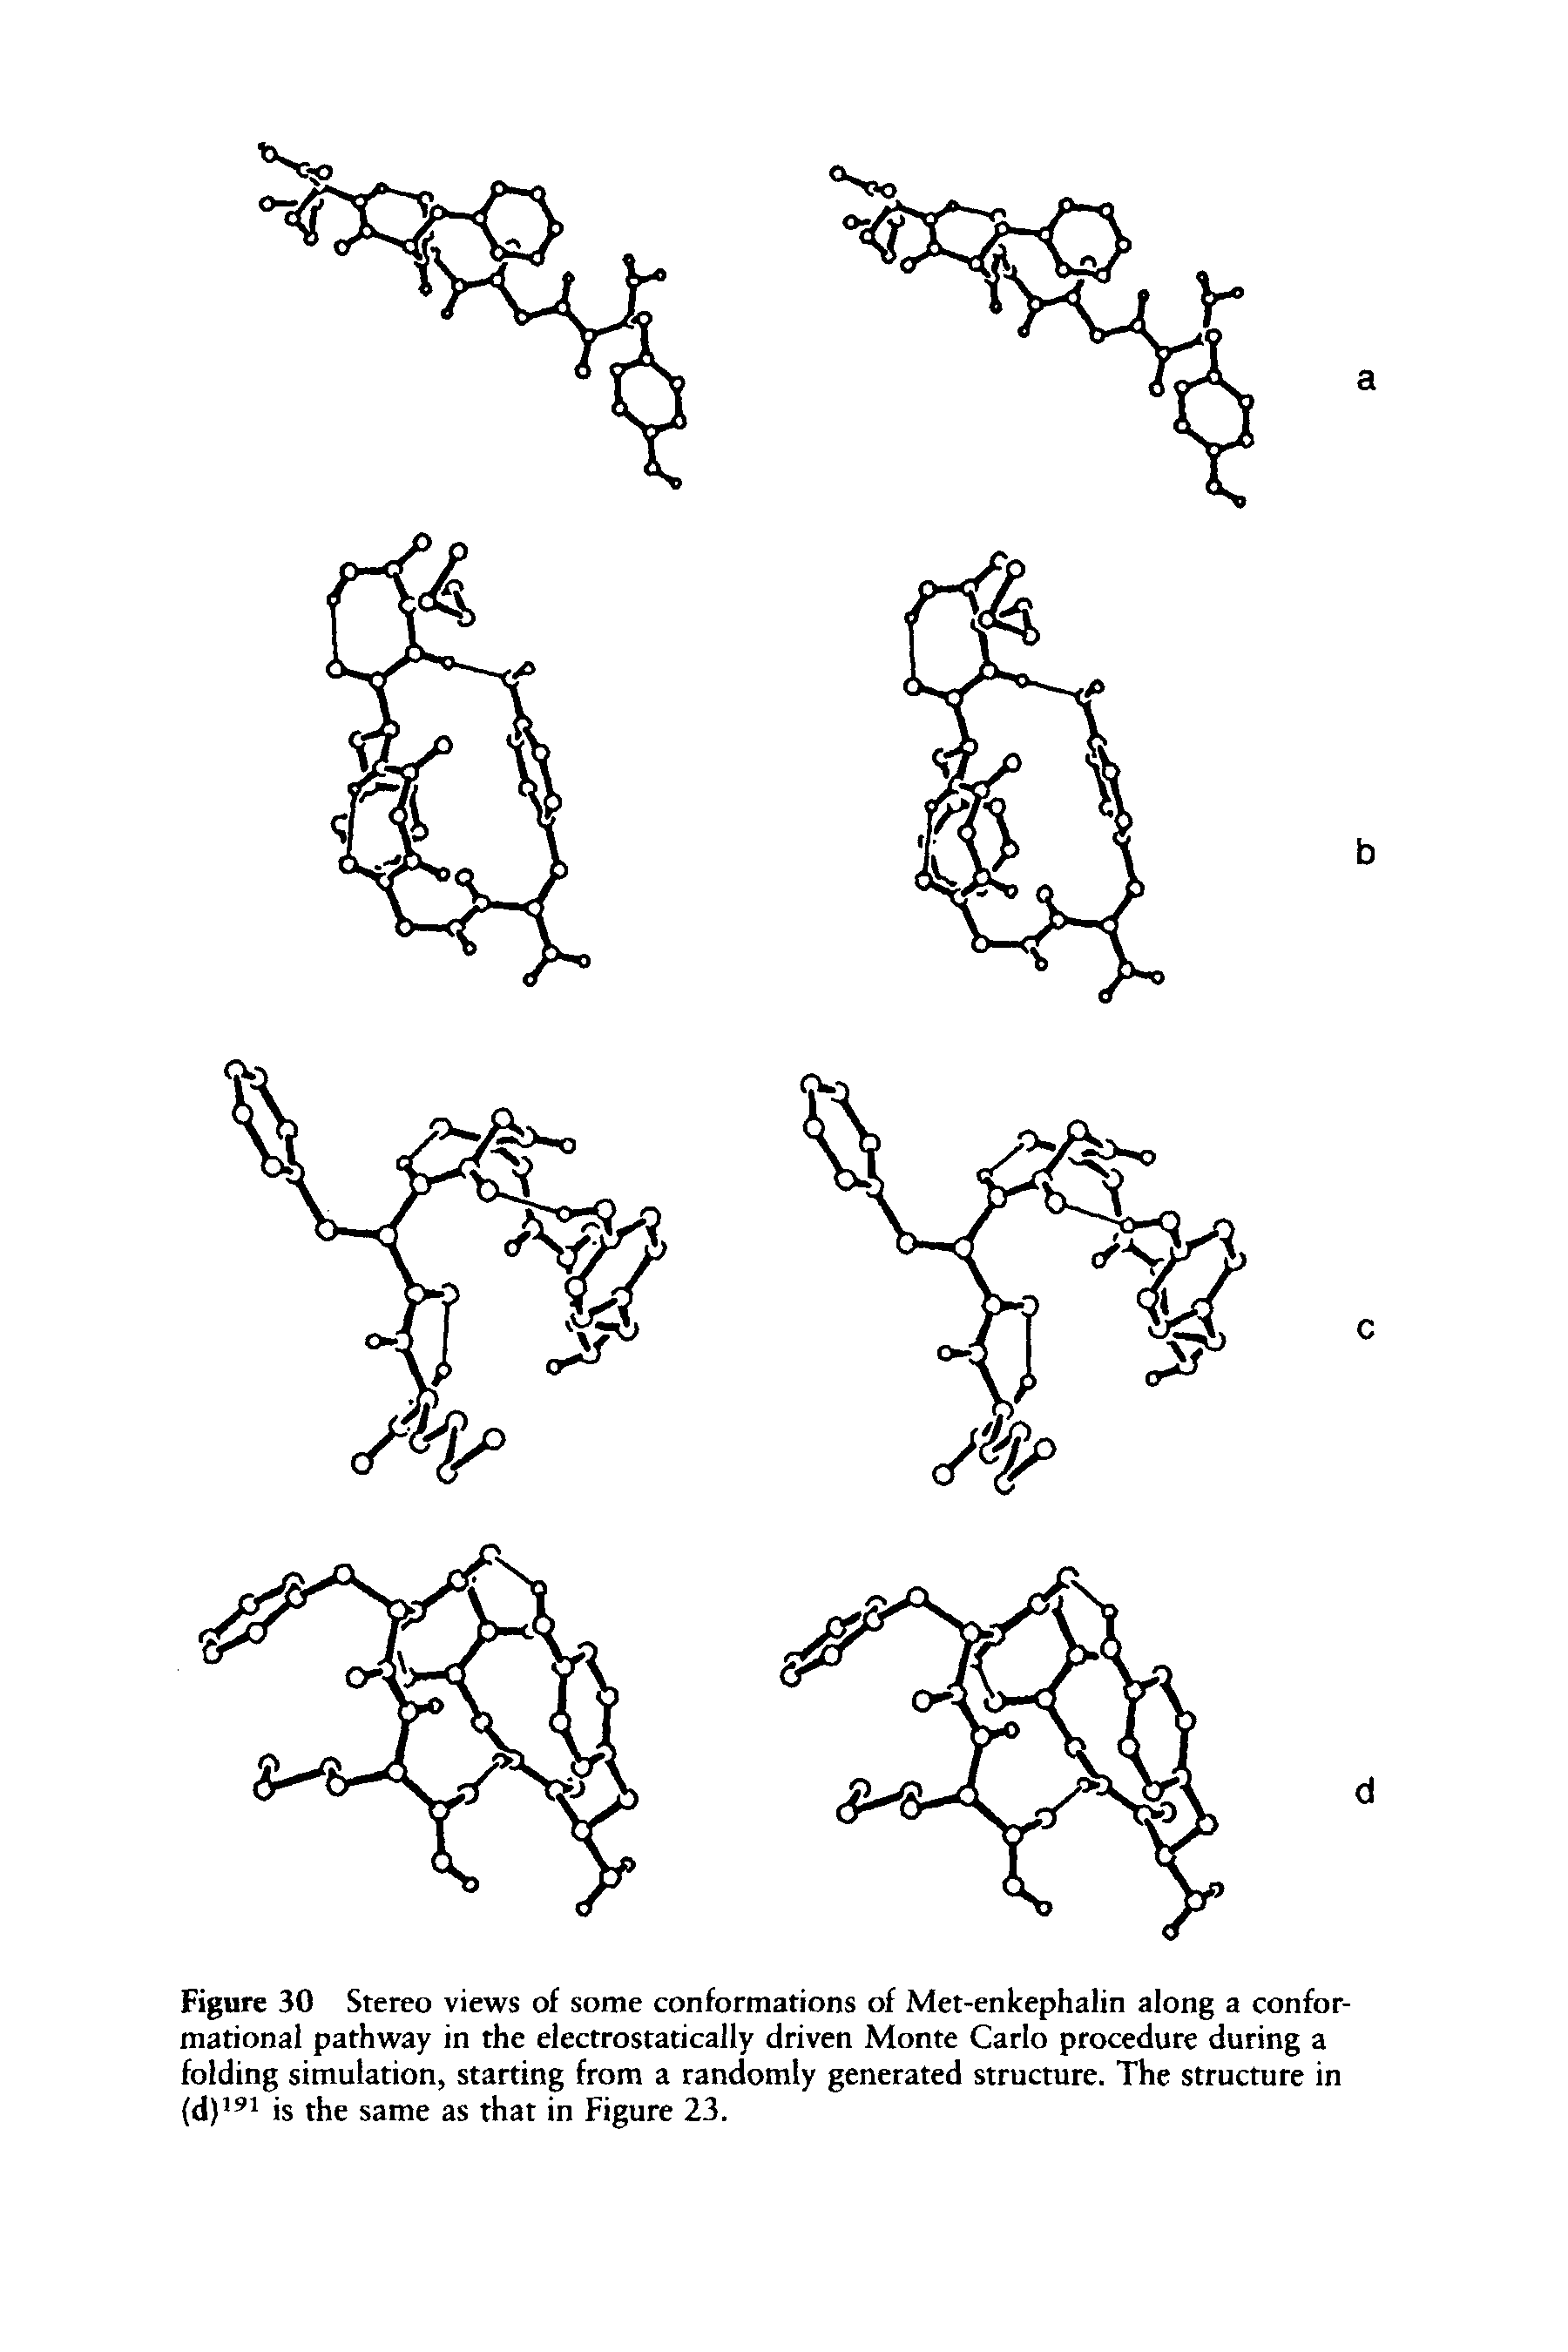 Figure 30 Stereo views of some conformations of Met-enkephalin along a conformational pathway in the electrostatically driven Monte Carlo procedure during a folding simulation, starting from a randomly generated structure. The structure in (d)191 is the same as that in Figure 23.